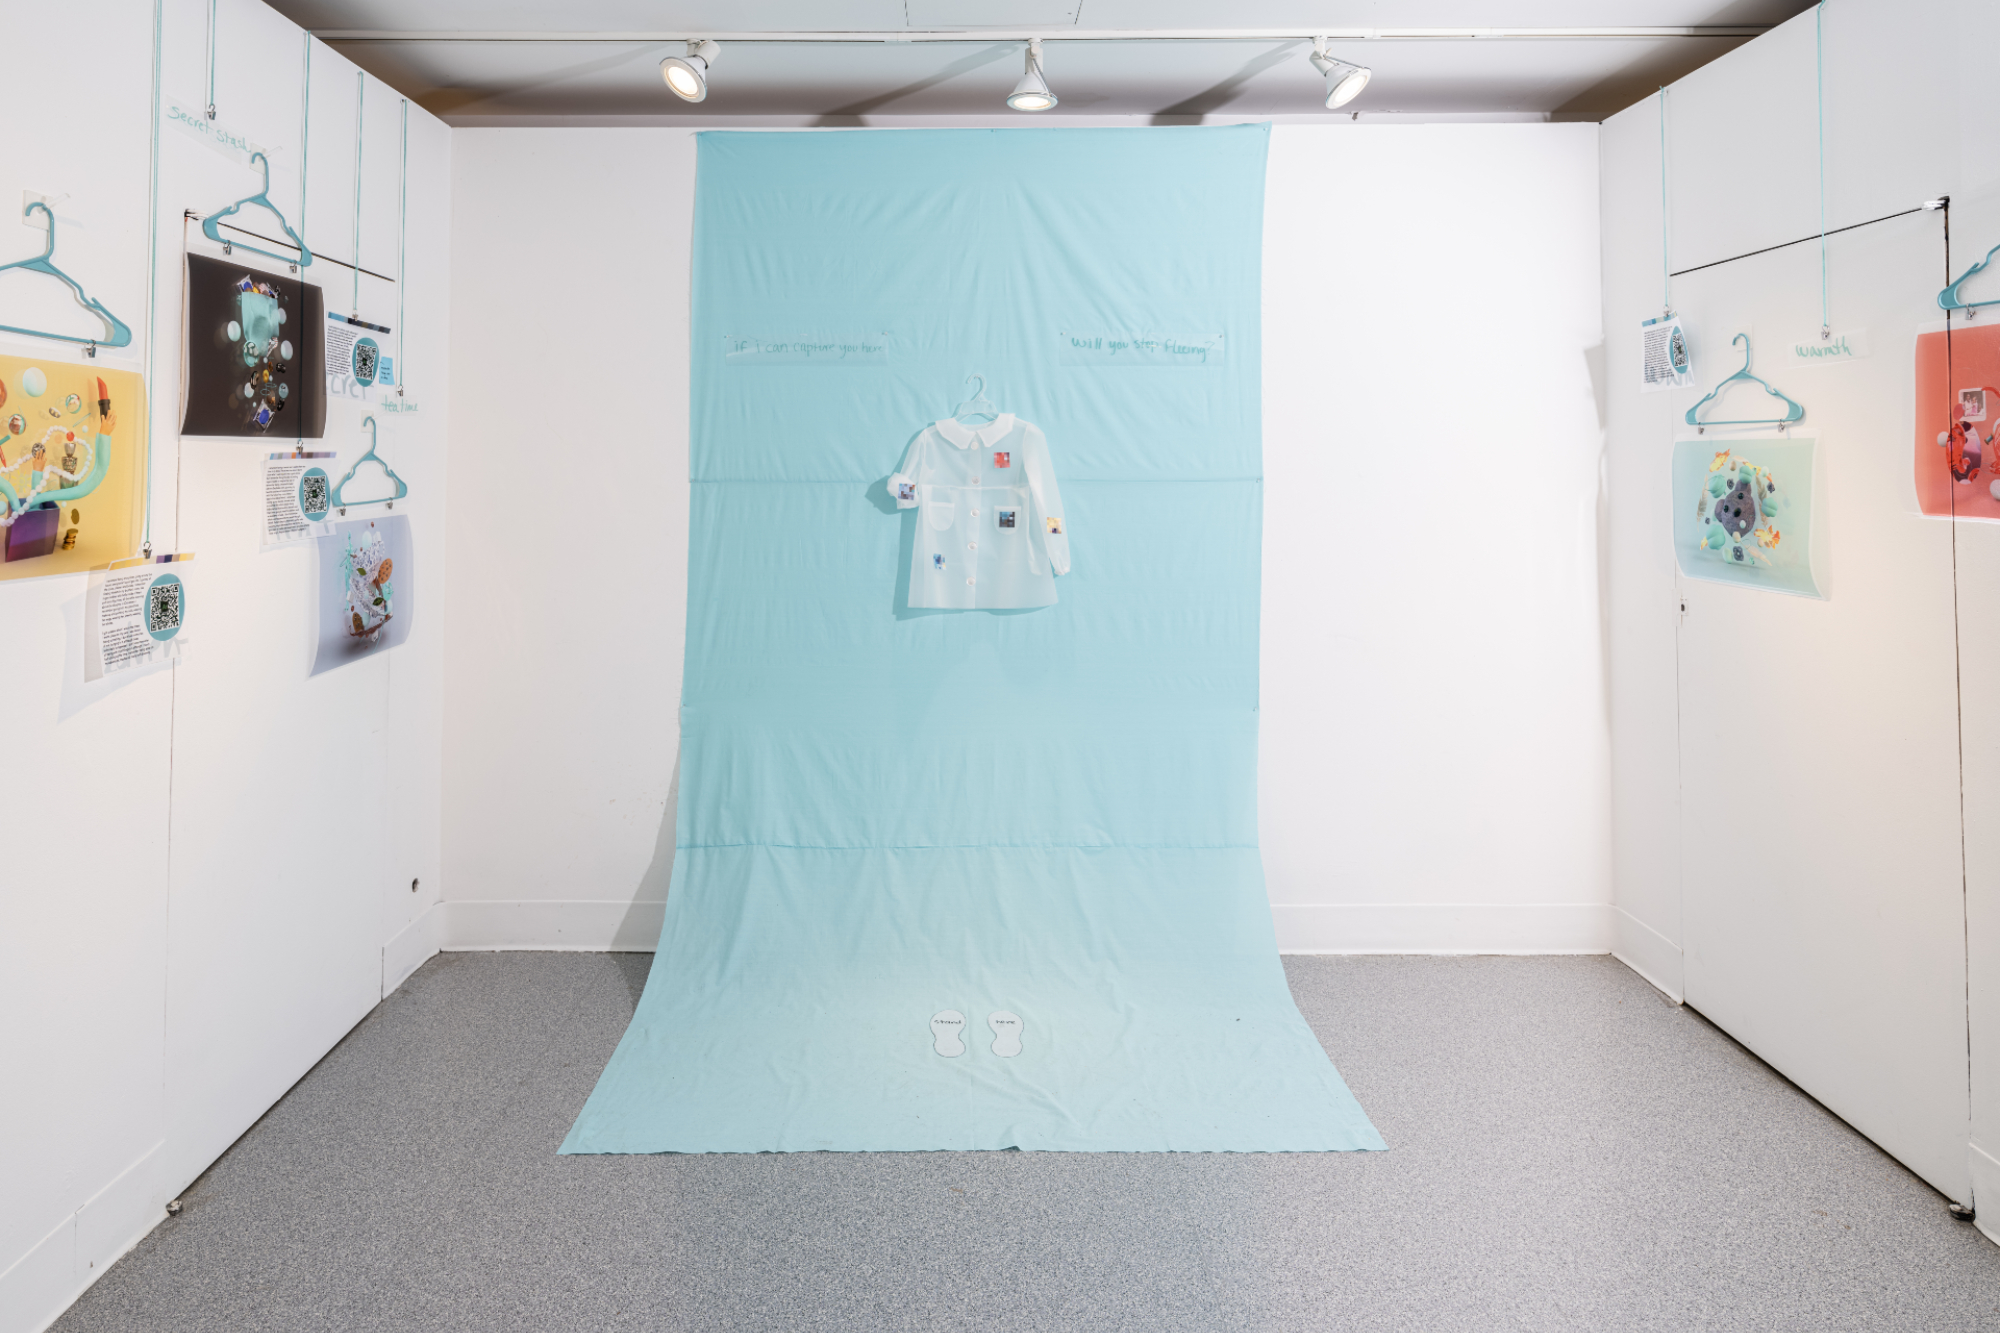 a little dress on a backdrop of fabric in a white cubicle with printed designs hanging on the adjacent walls